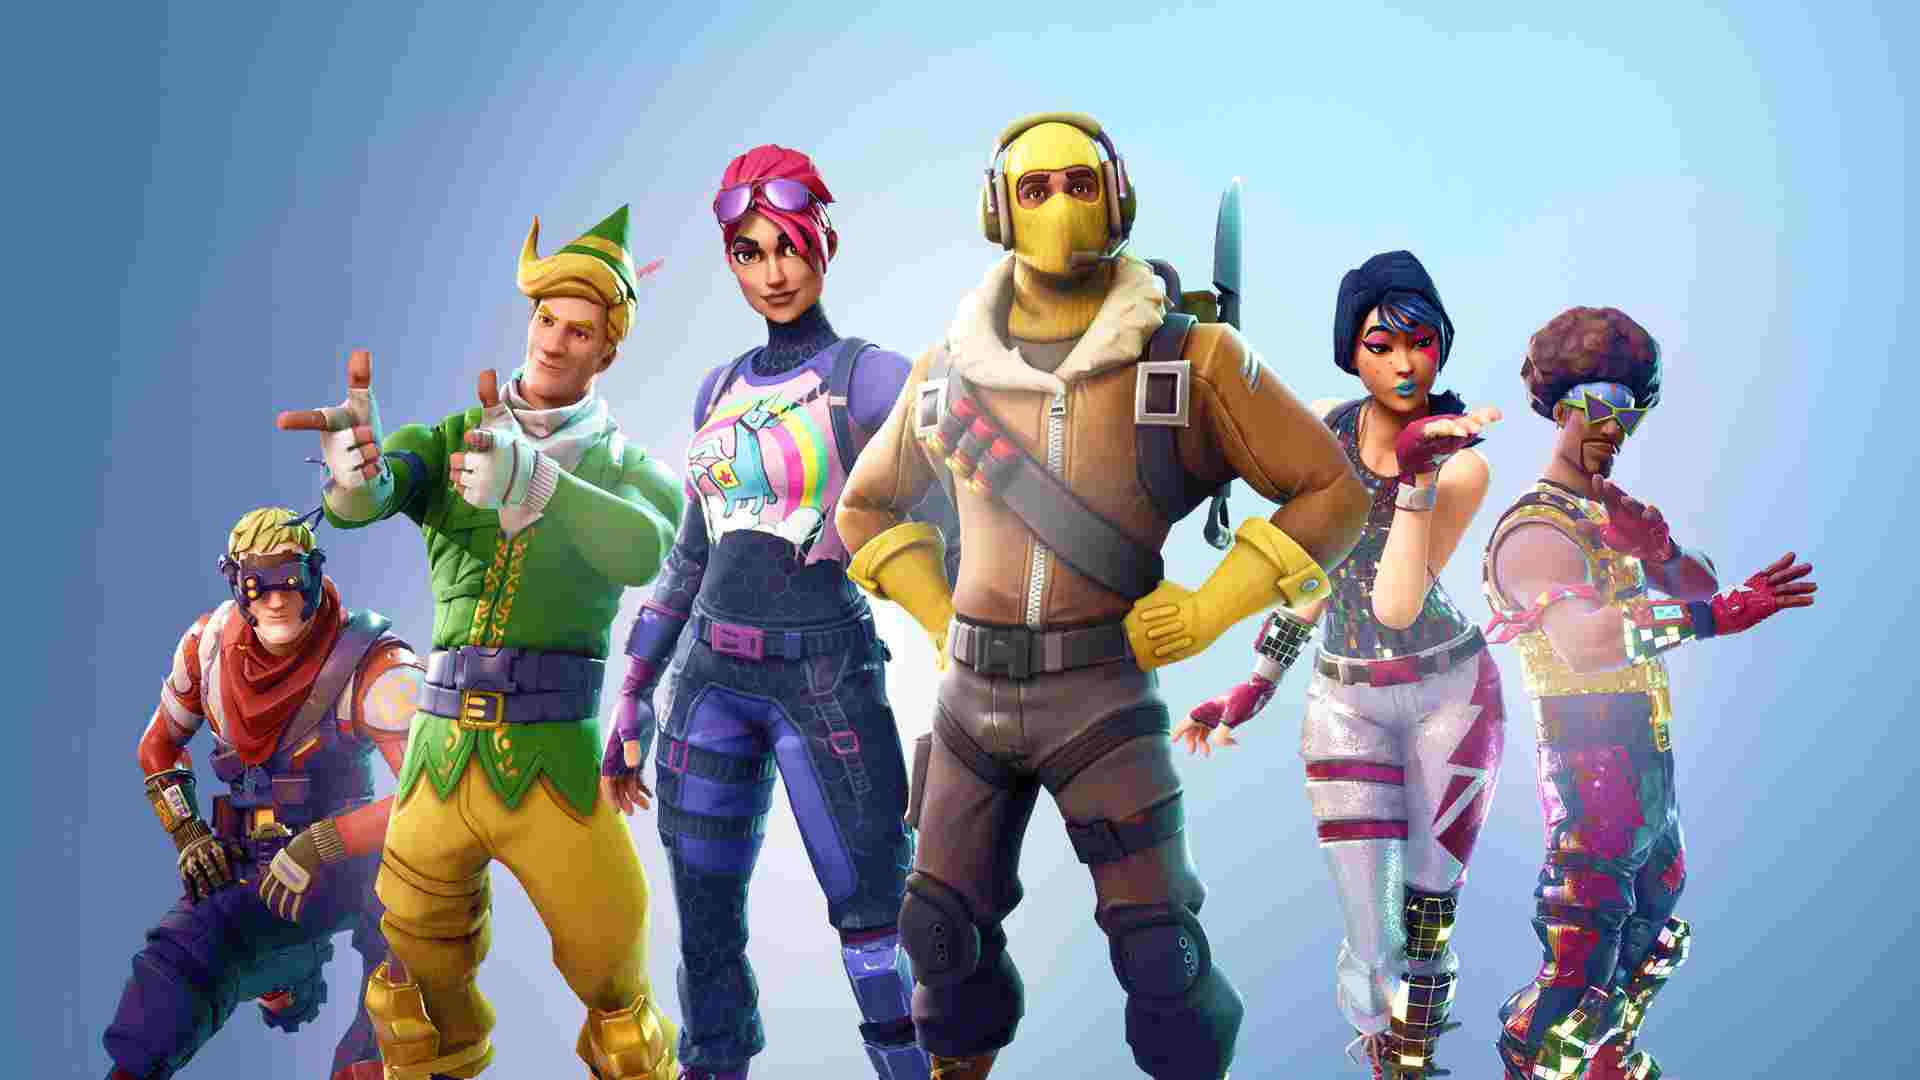 Unlock the Sparkle Specialist Outfit in Fortnite Wallpaper